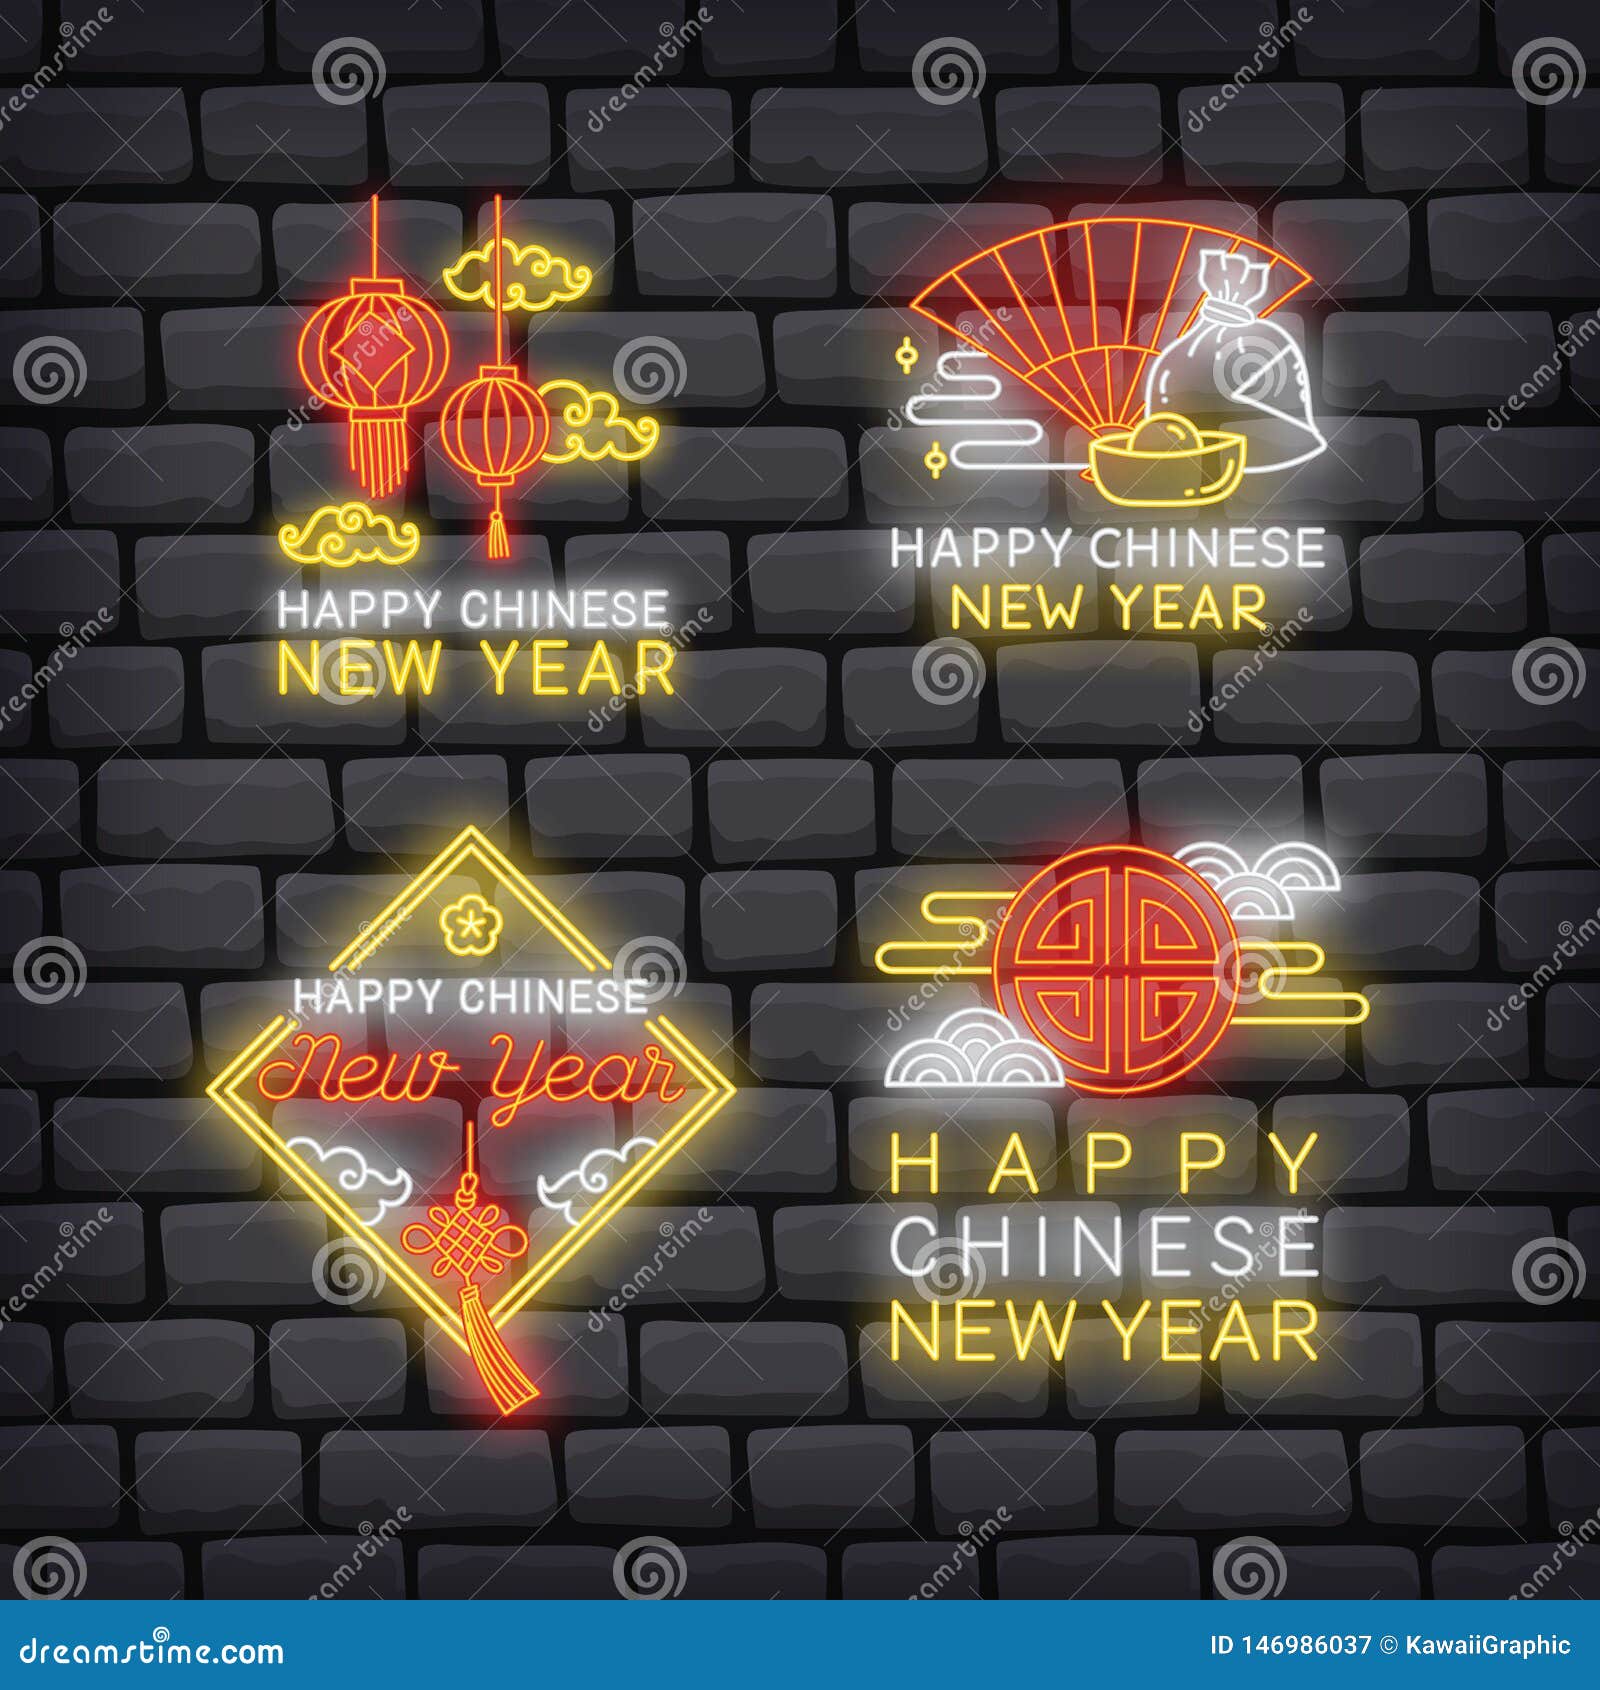 Neon sign of chinese hieroglyph means hope Vector Image